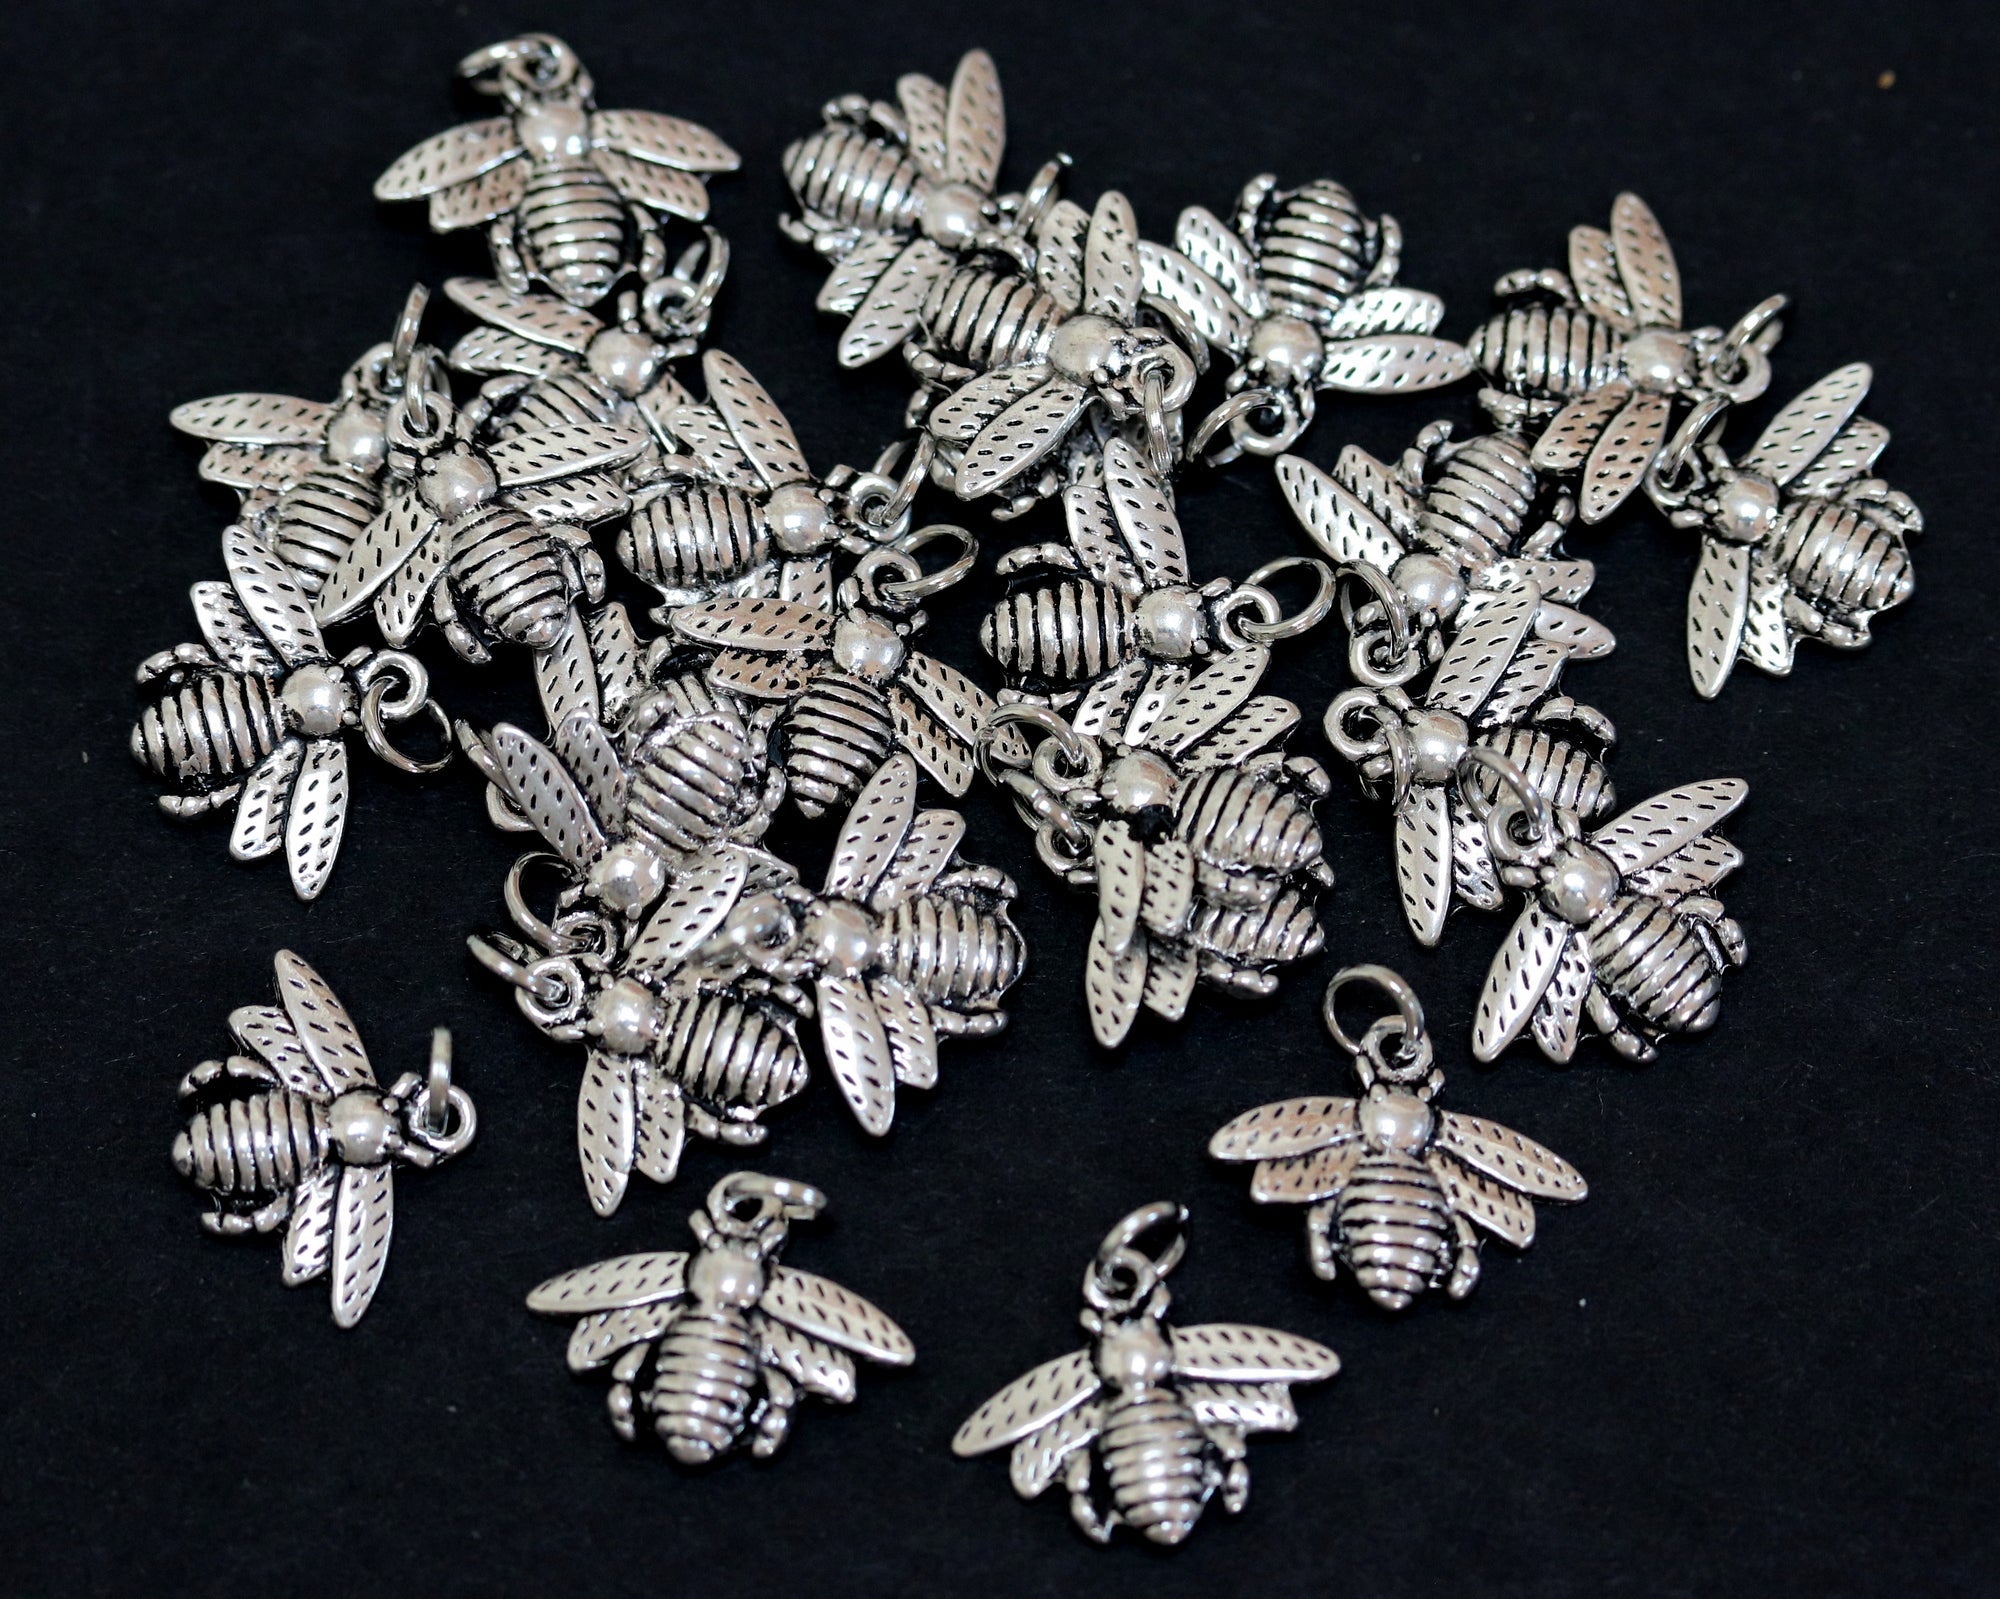 Bee charm 14x17mm antique silver plated metal alloy pendant